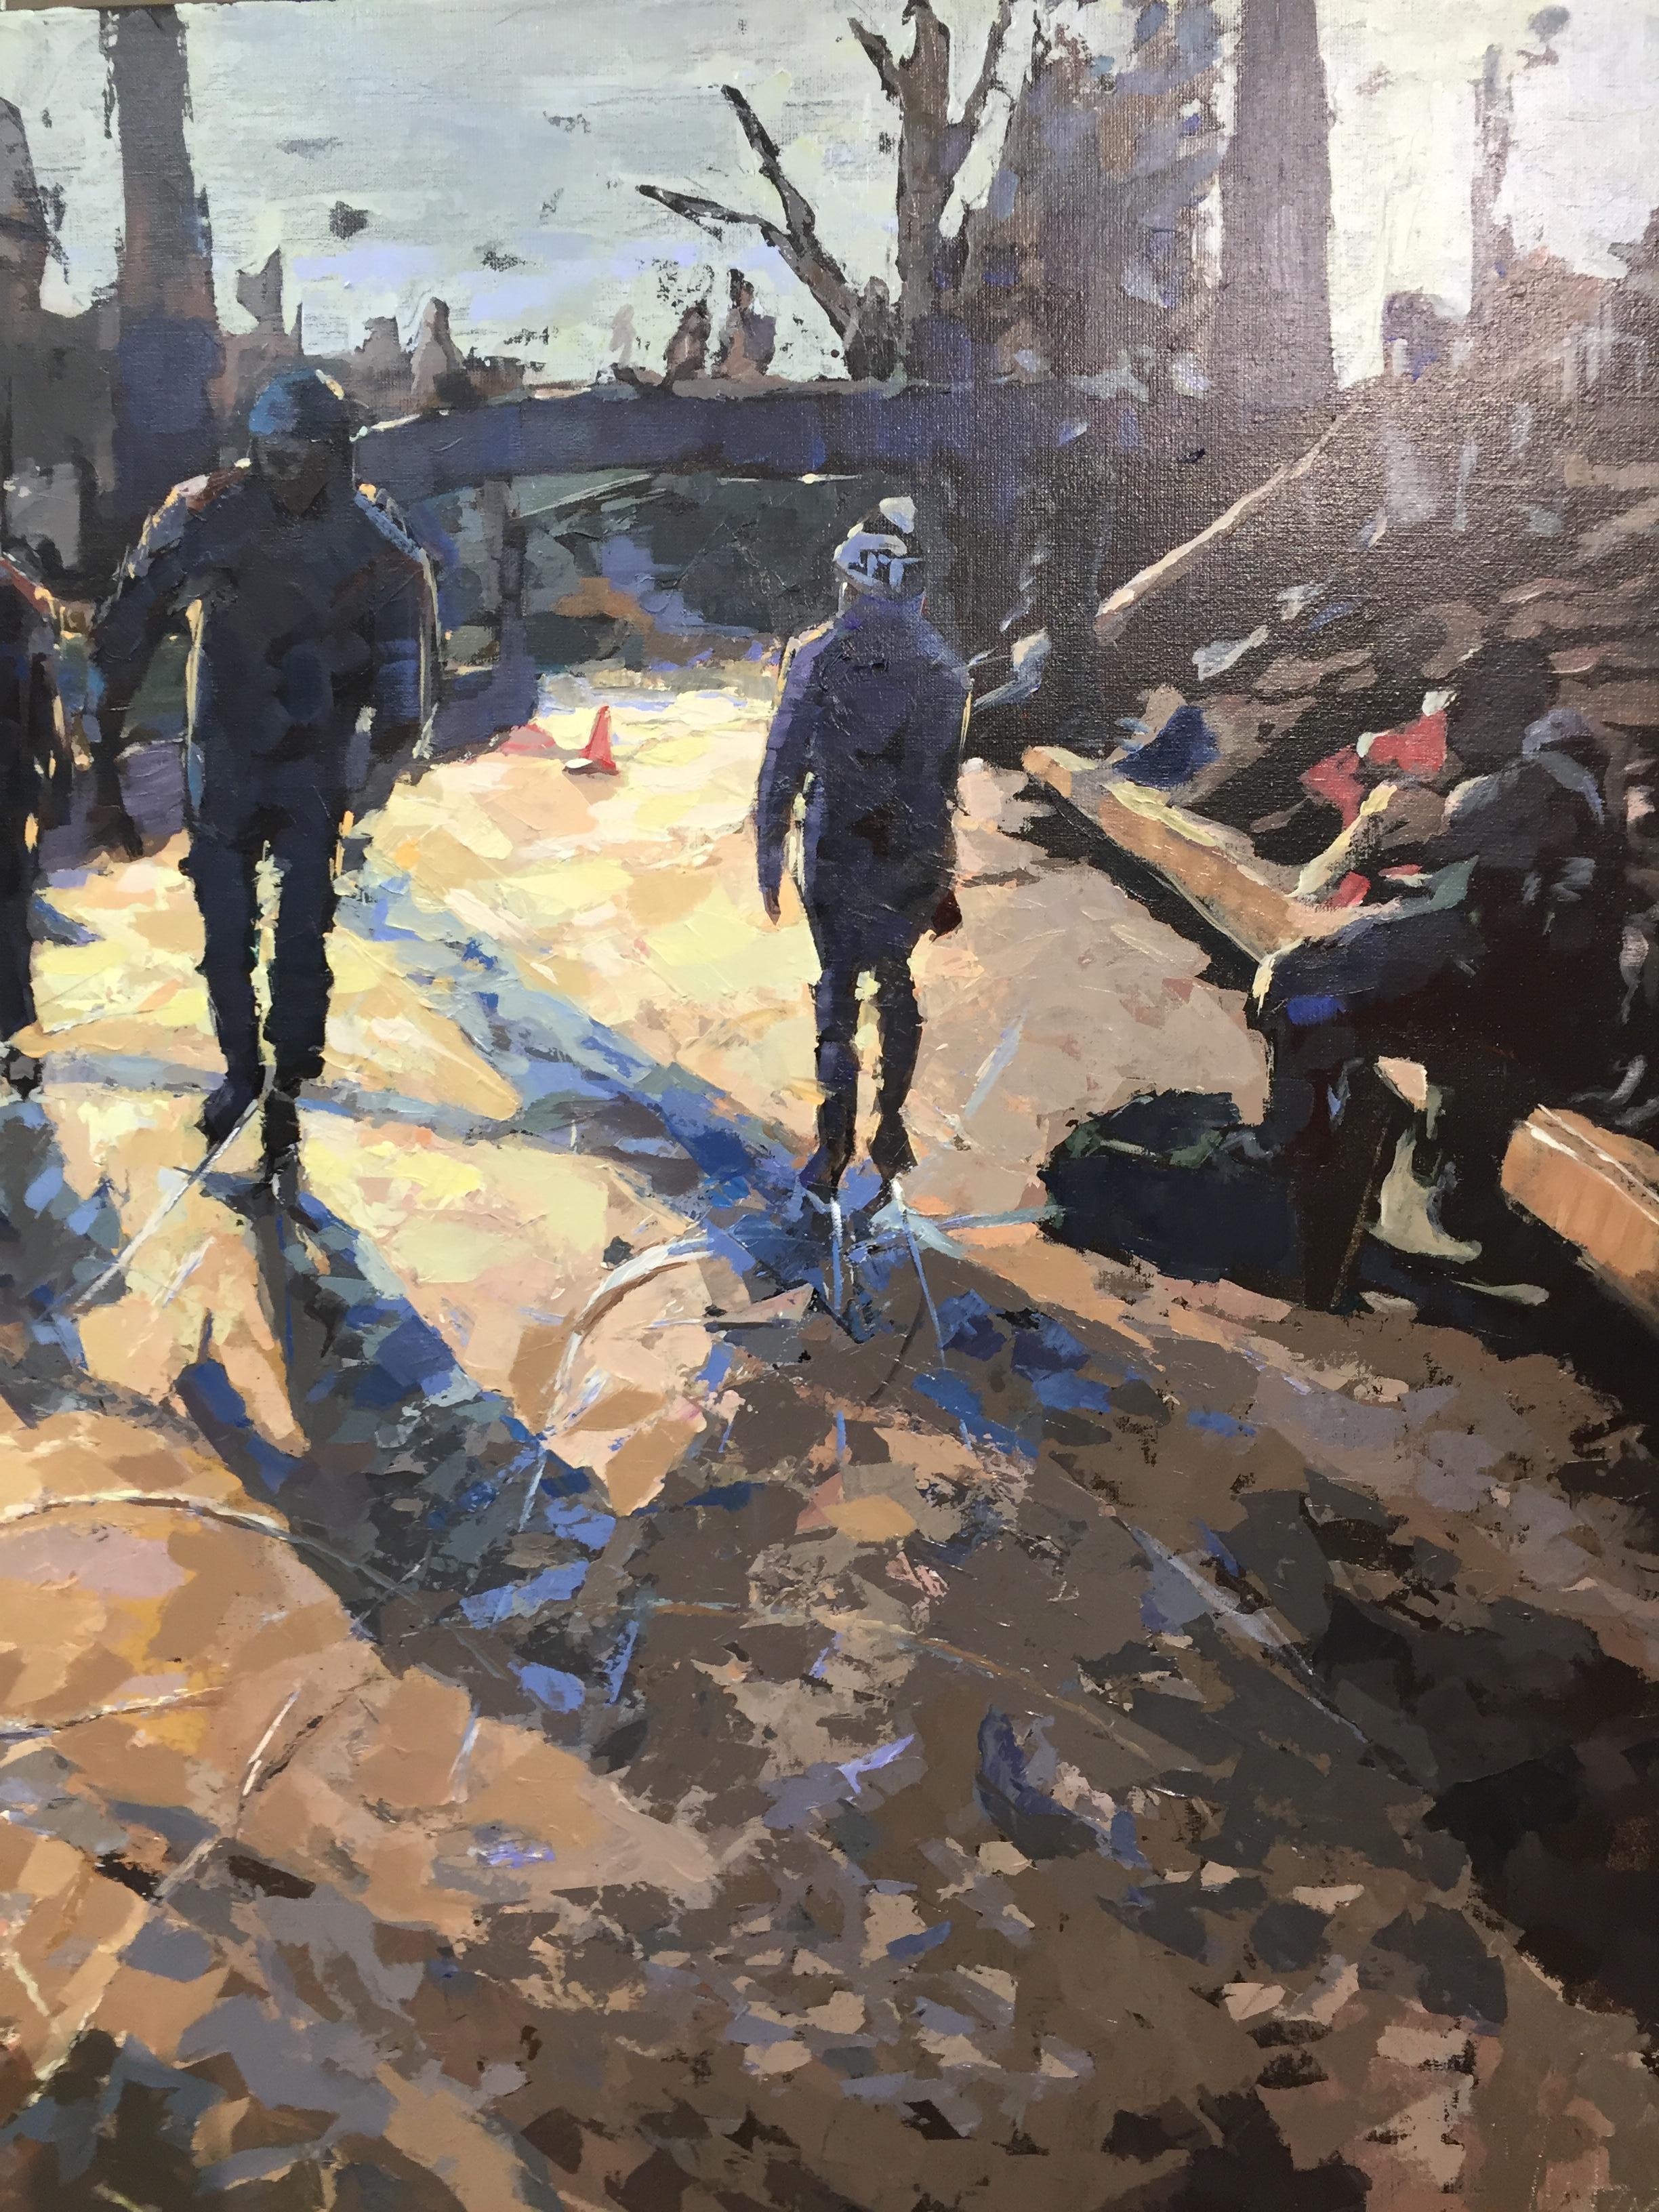 Mitzy Renooy made this painting in the winter of 2018. People were skating in Giethoorn, 'Dutch Venice', a village with streets, canals, from water. Very populair in summer to visit the village with small boats, bu also very populair in winter, when